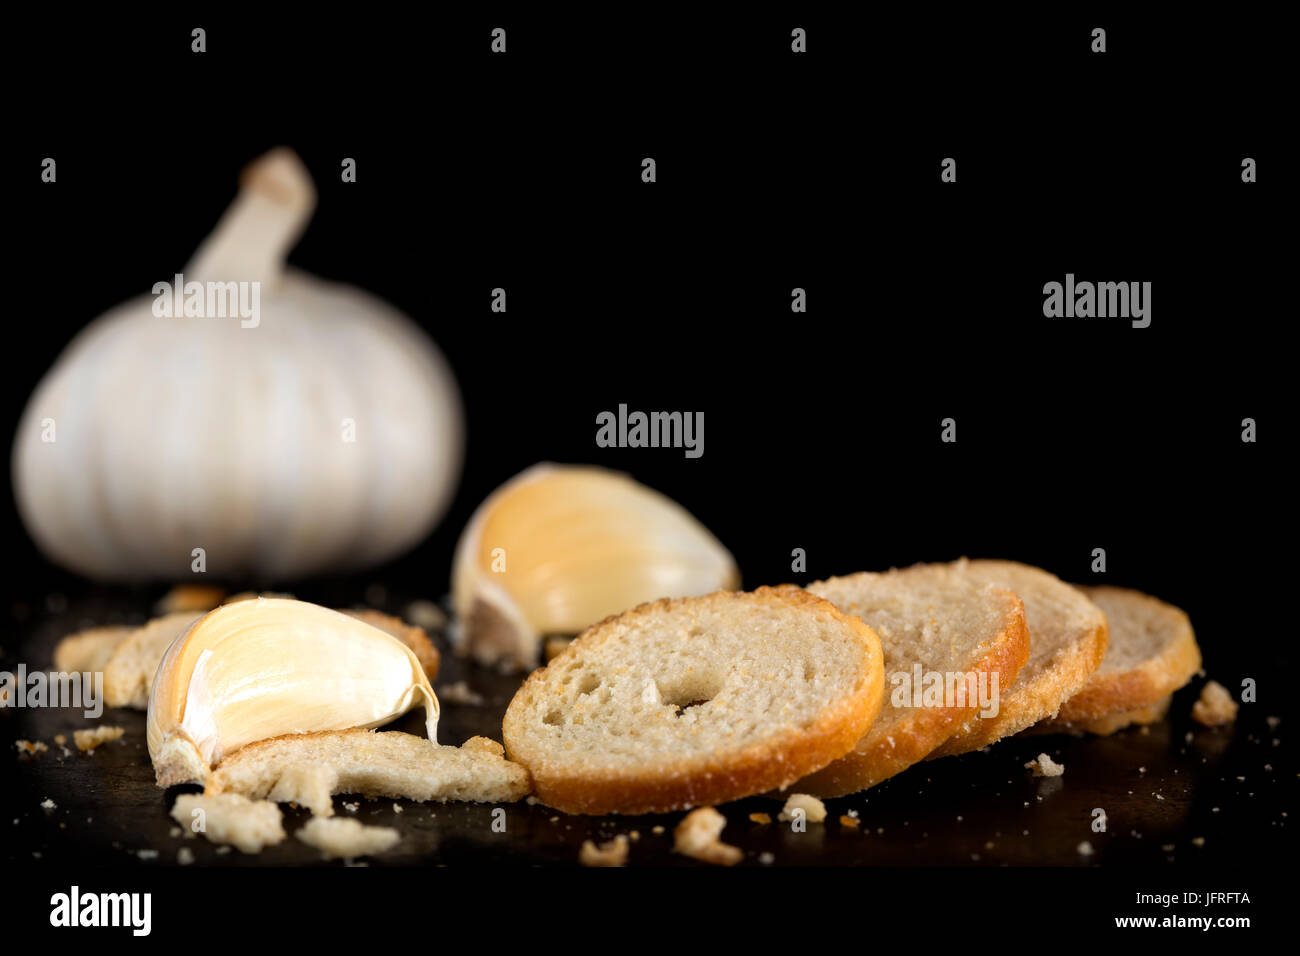 Mini rolls of baked bread and garlic on dark background Stock Photo